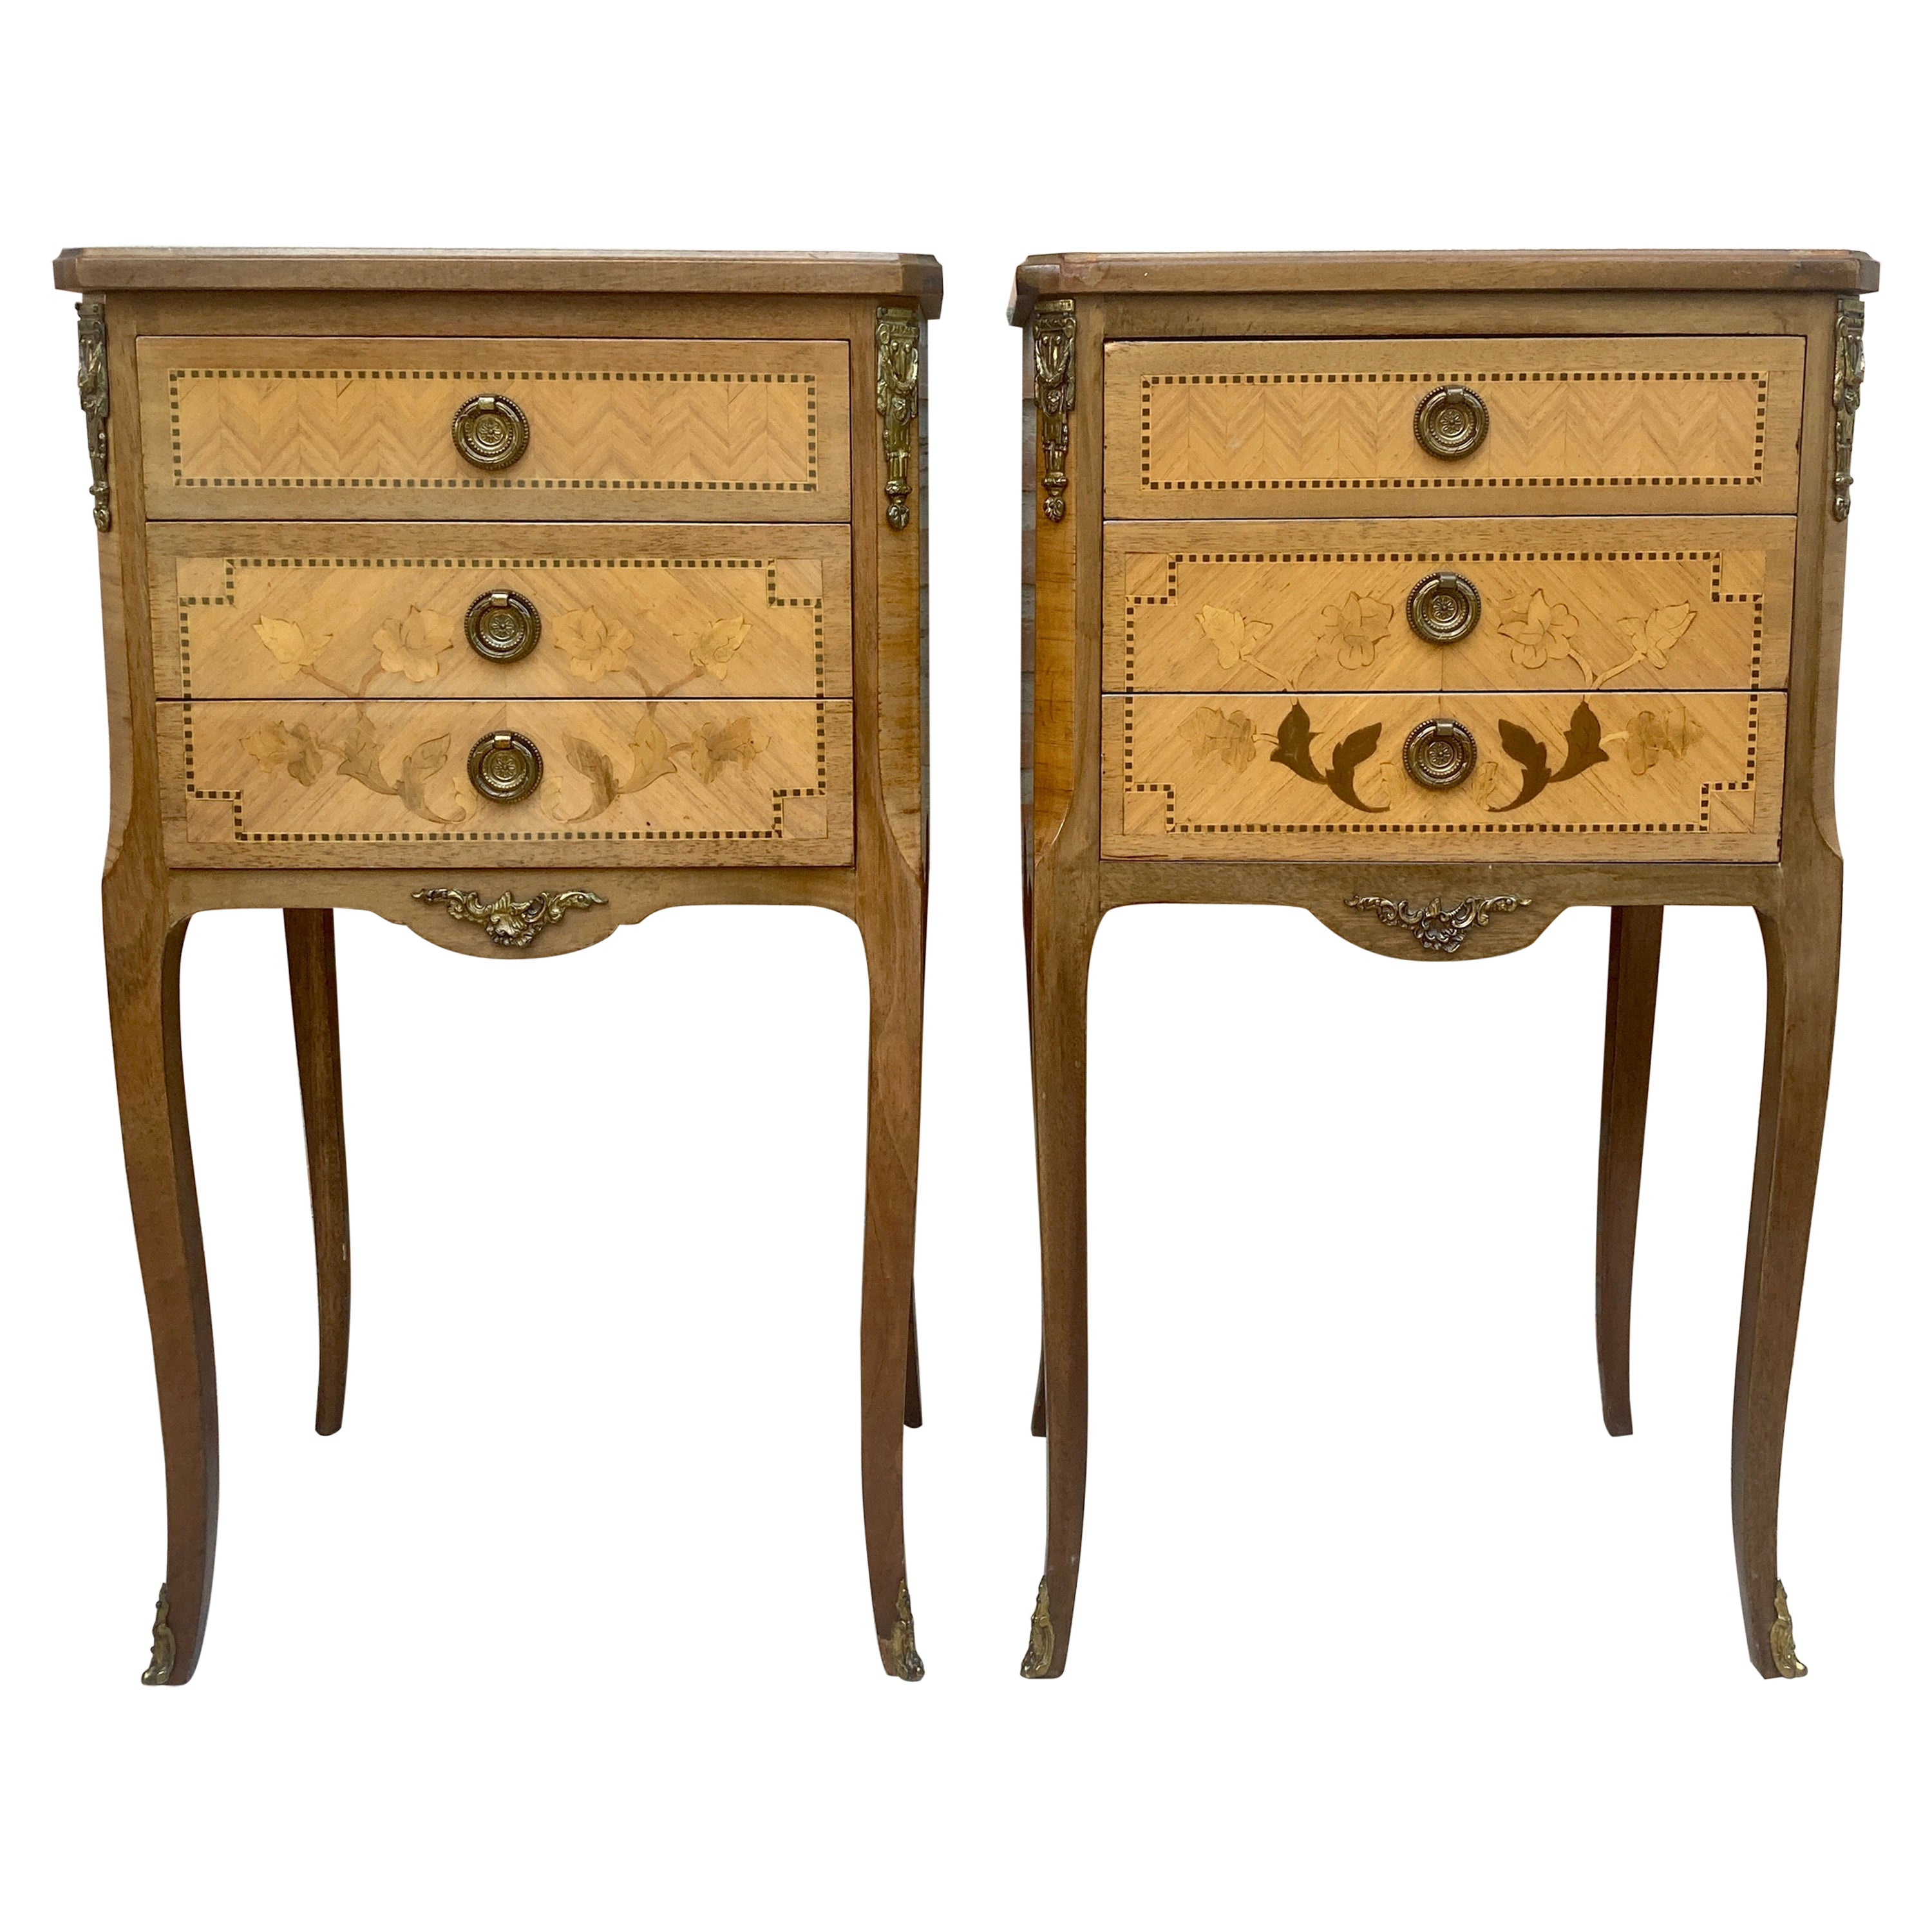 Early 20th Century French Marquetry Bedside Tables and Bronze Hardware, Set of 2 For Sale